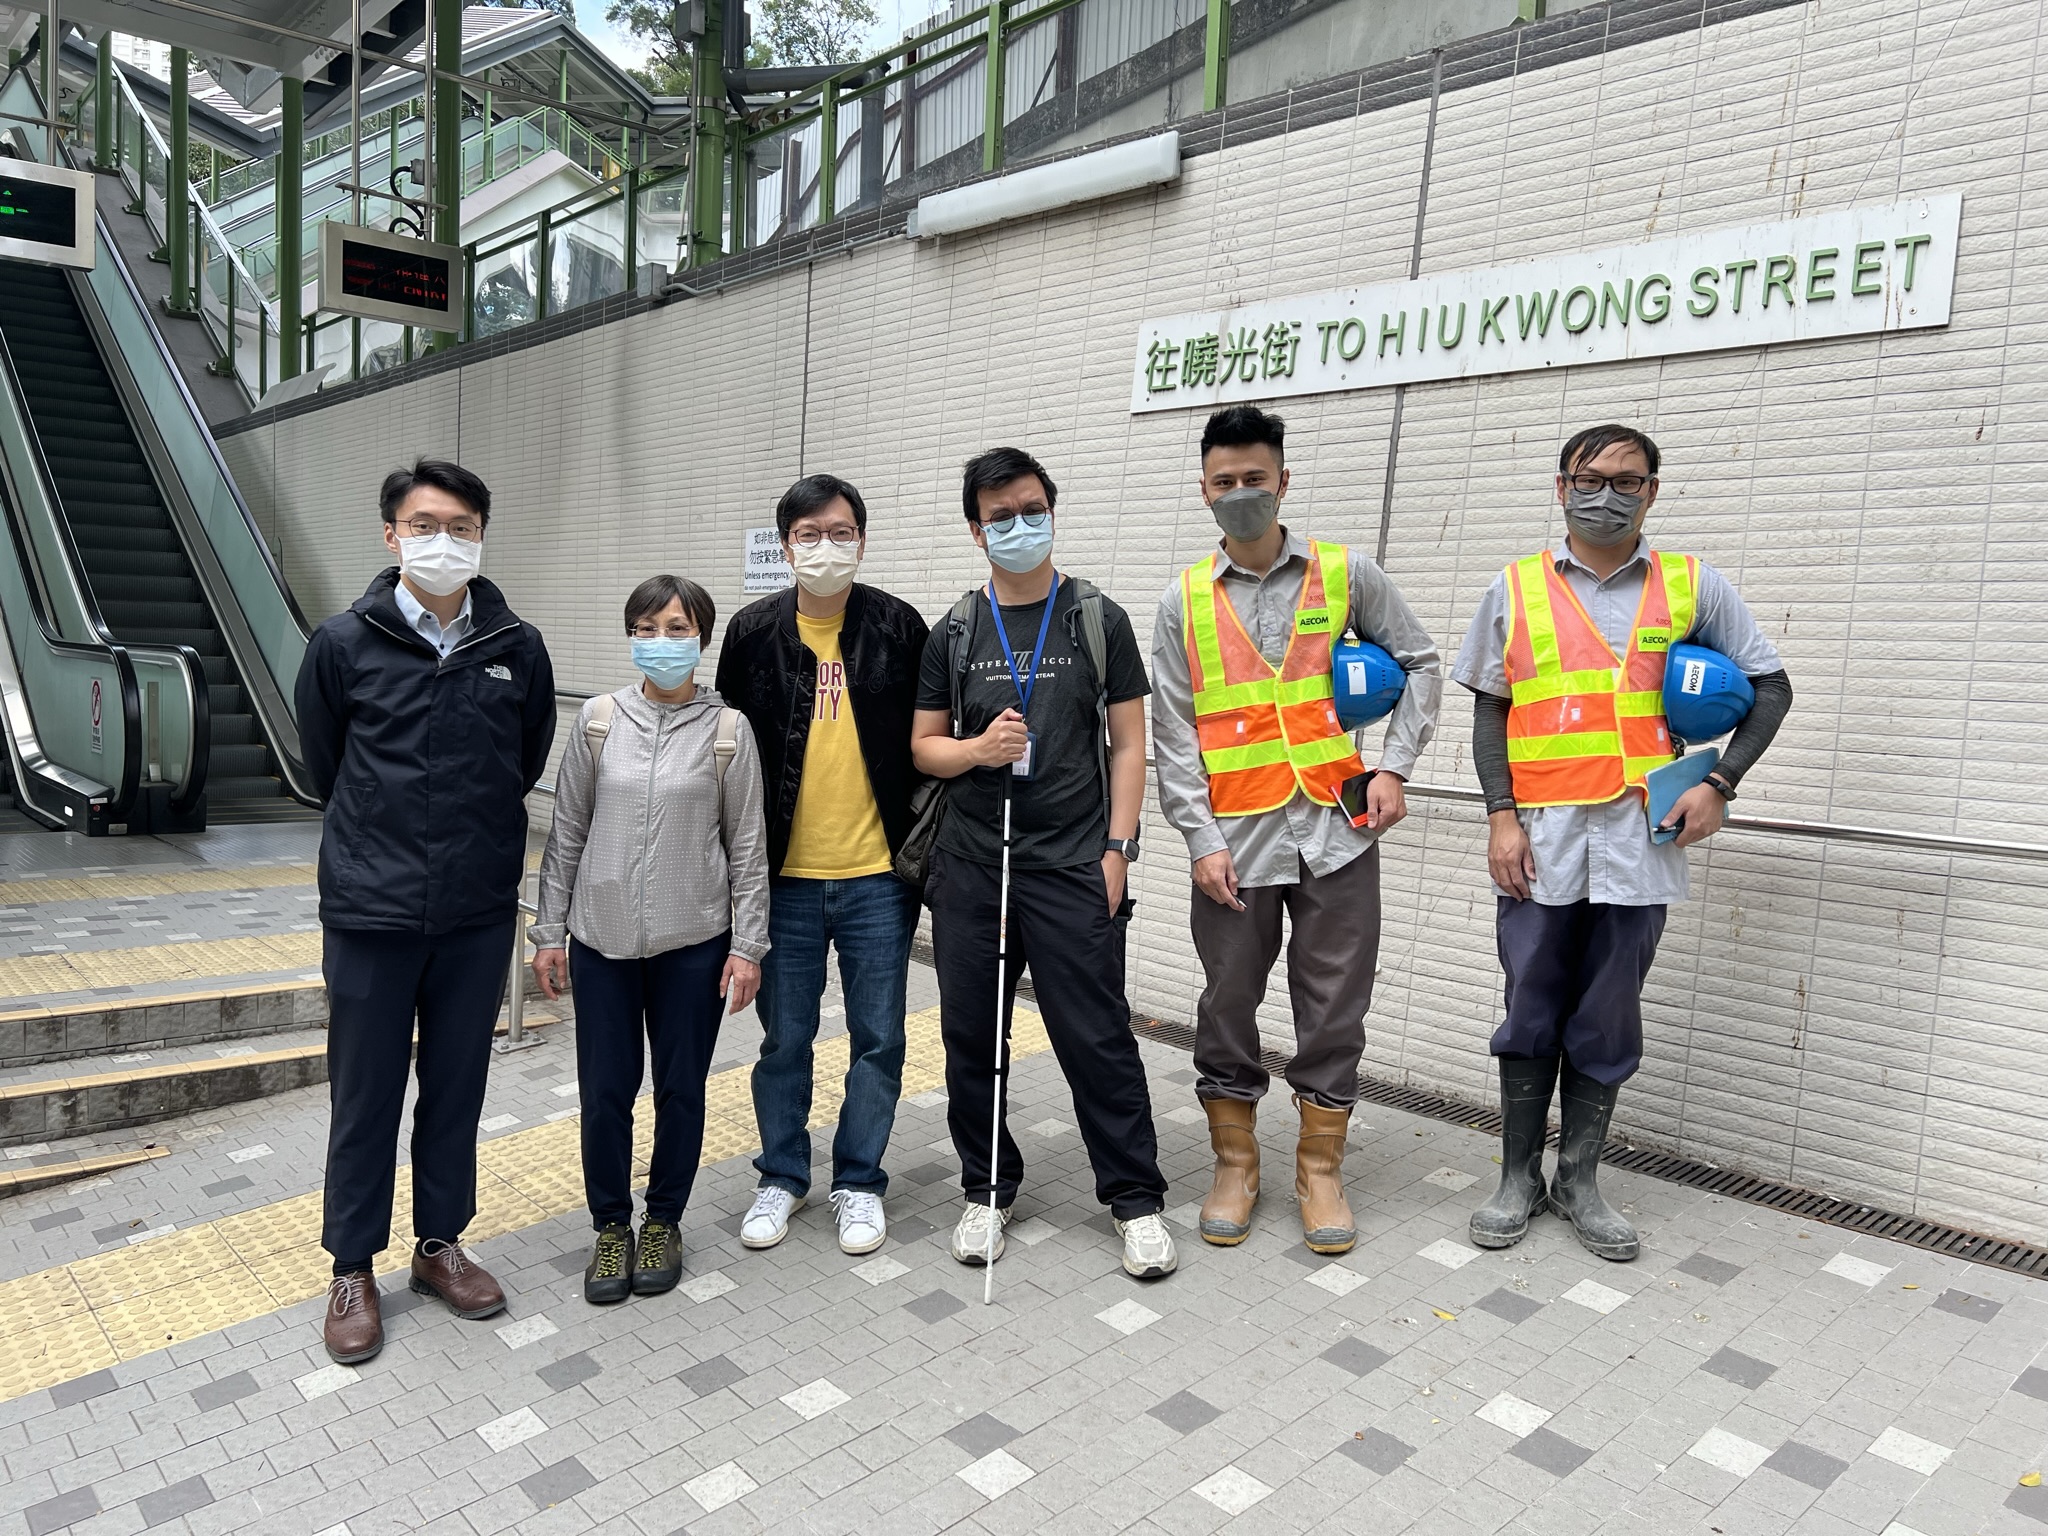 Representatives of associations for the visually impaired visited of the escalator linking Hiu Kwong Street (near Sau Mau Ping Memorial Park) with Hiu Ming Street.